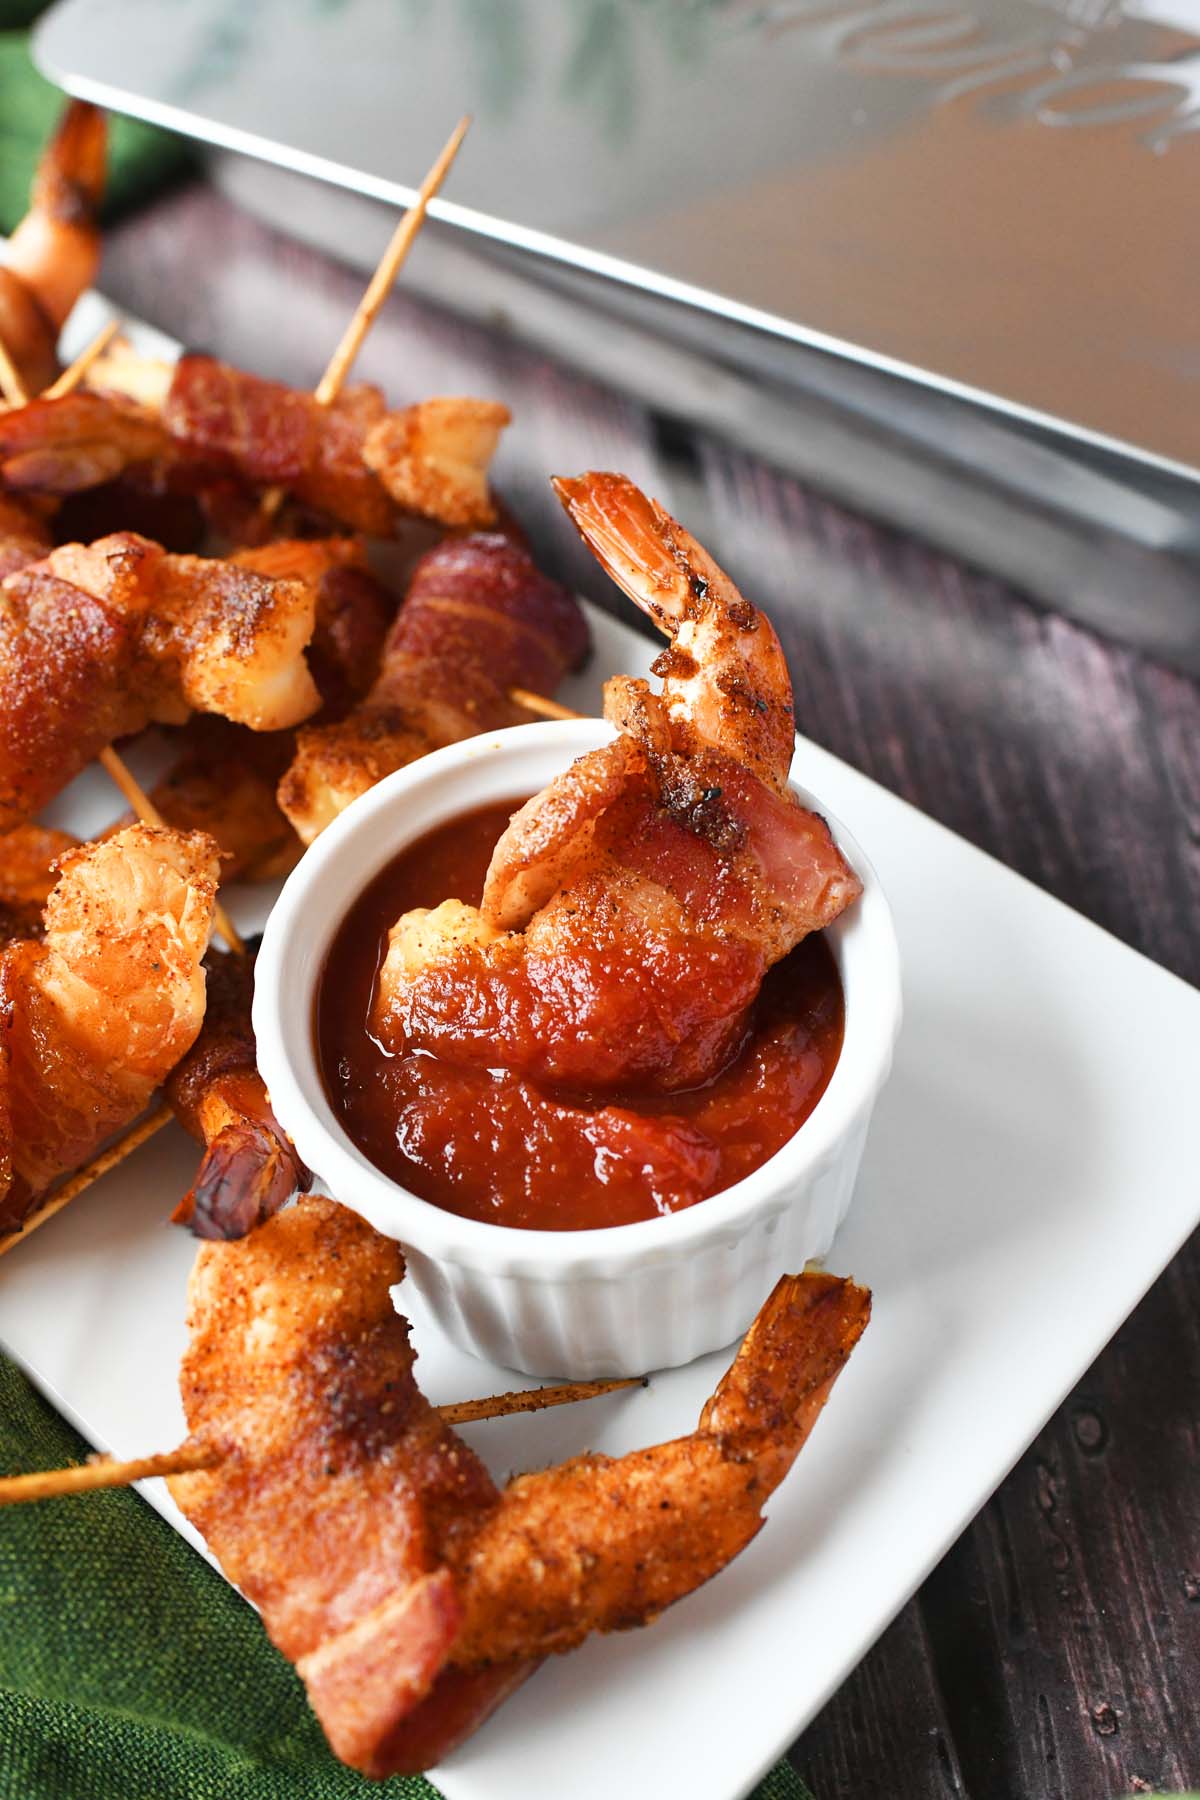 A bacon wrapped shrimp dunked in chili sauce in a white ramekin.